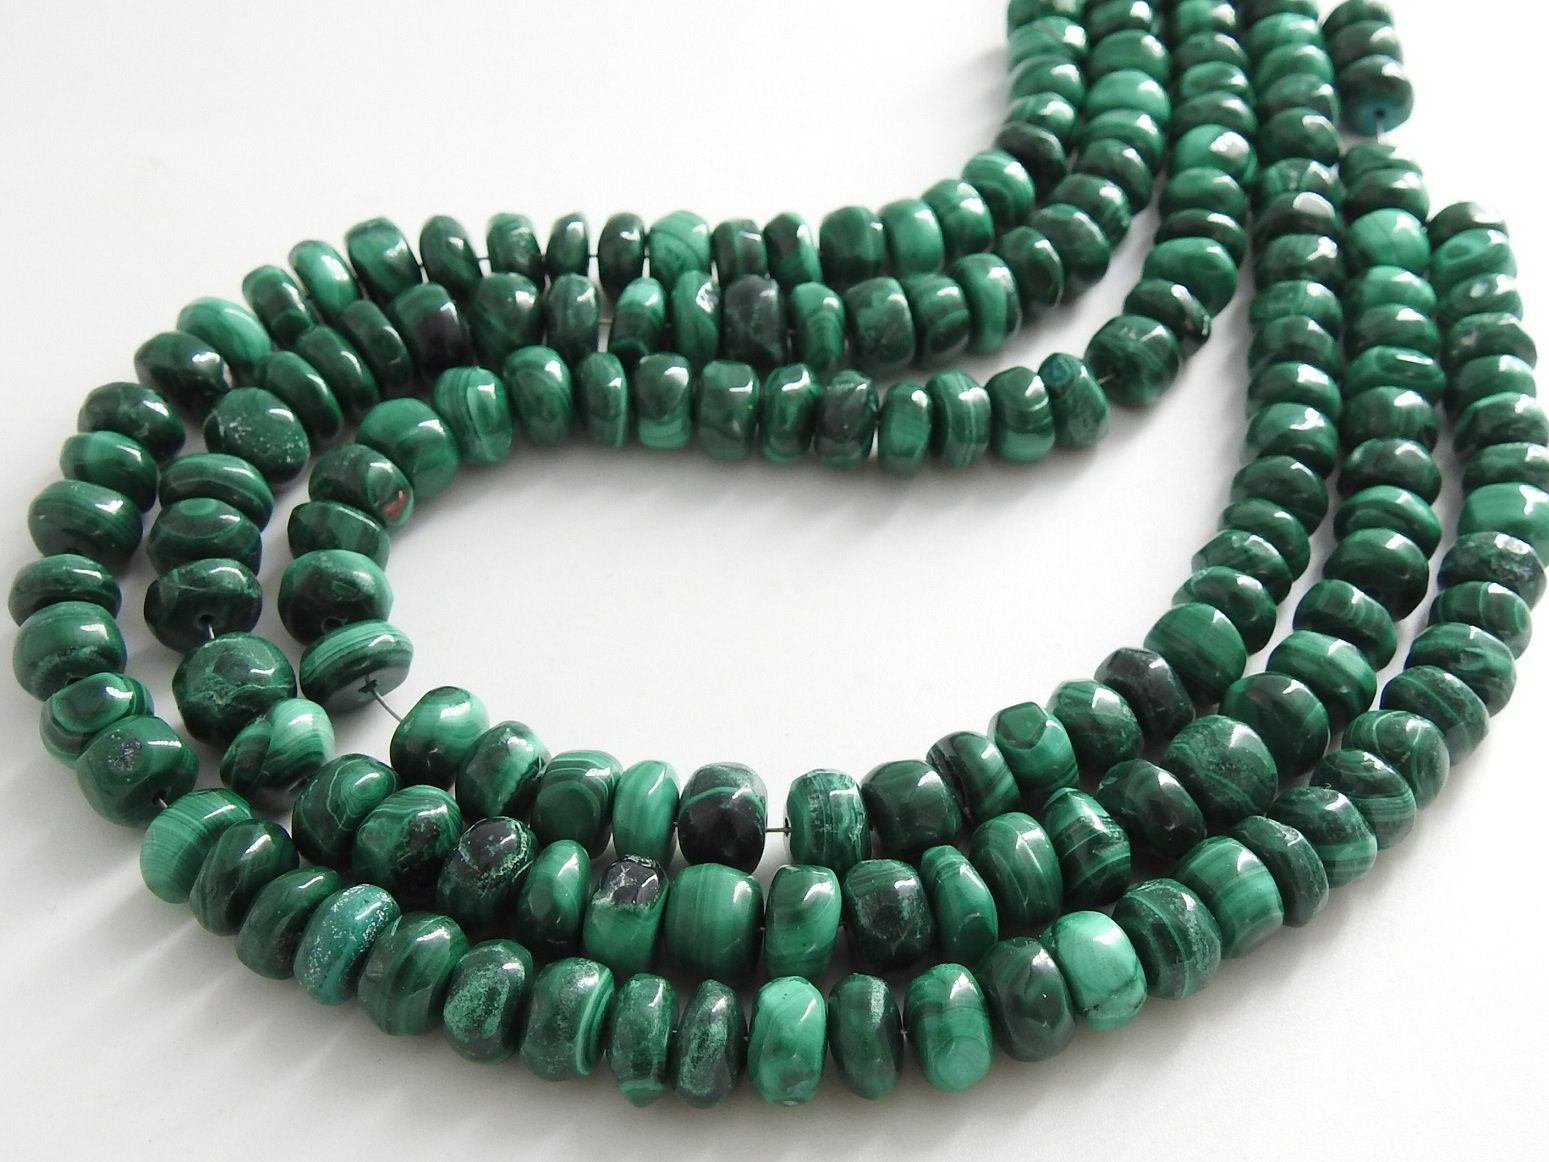 Malachite Roundel Bead,Smooth,Loose Stone,Handmade,For Making Jewelry,Necklace,Wholesaler,Supplies,10Inch Strand,100%Natural PME(B13) | Save 33% - Rajasthan Living 14